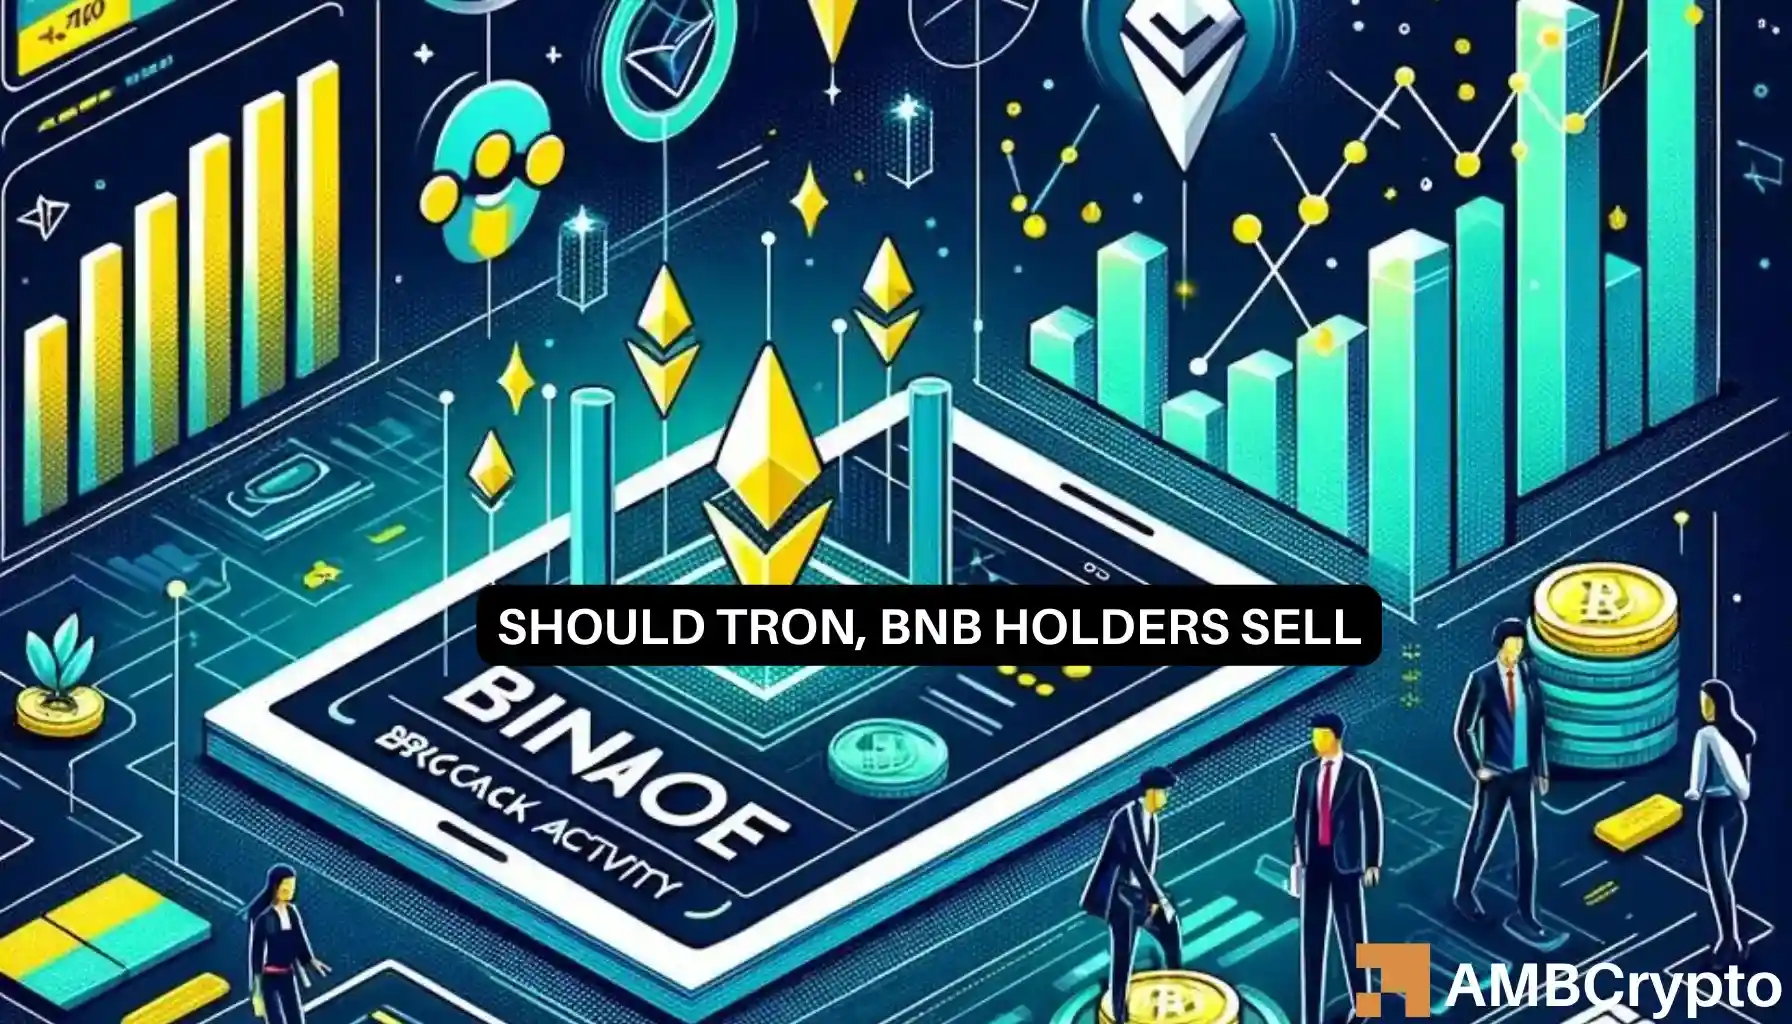 Network activity keeps BNB Chain, Tron atop performance charts